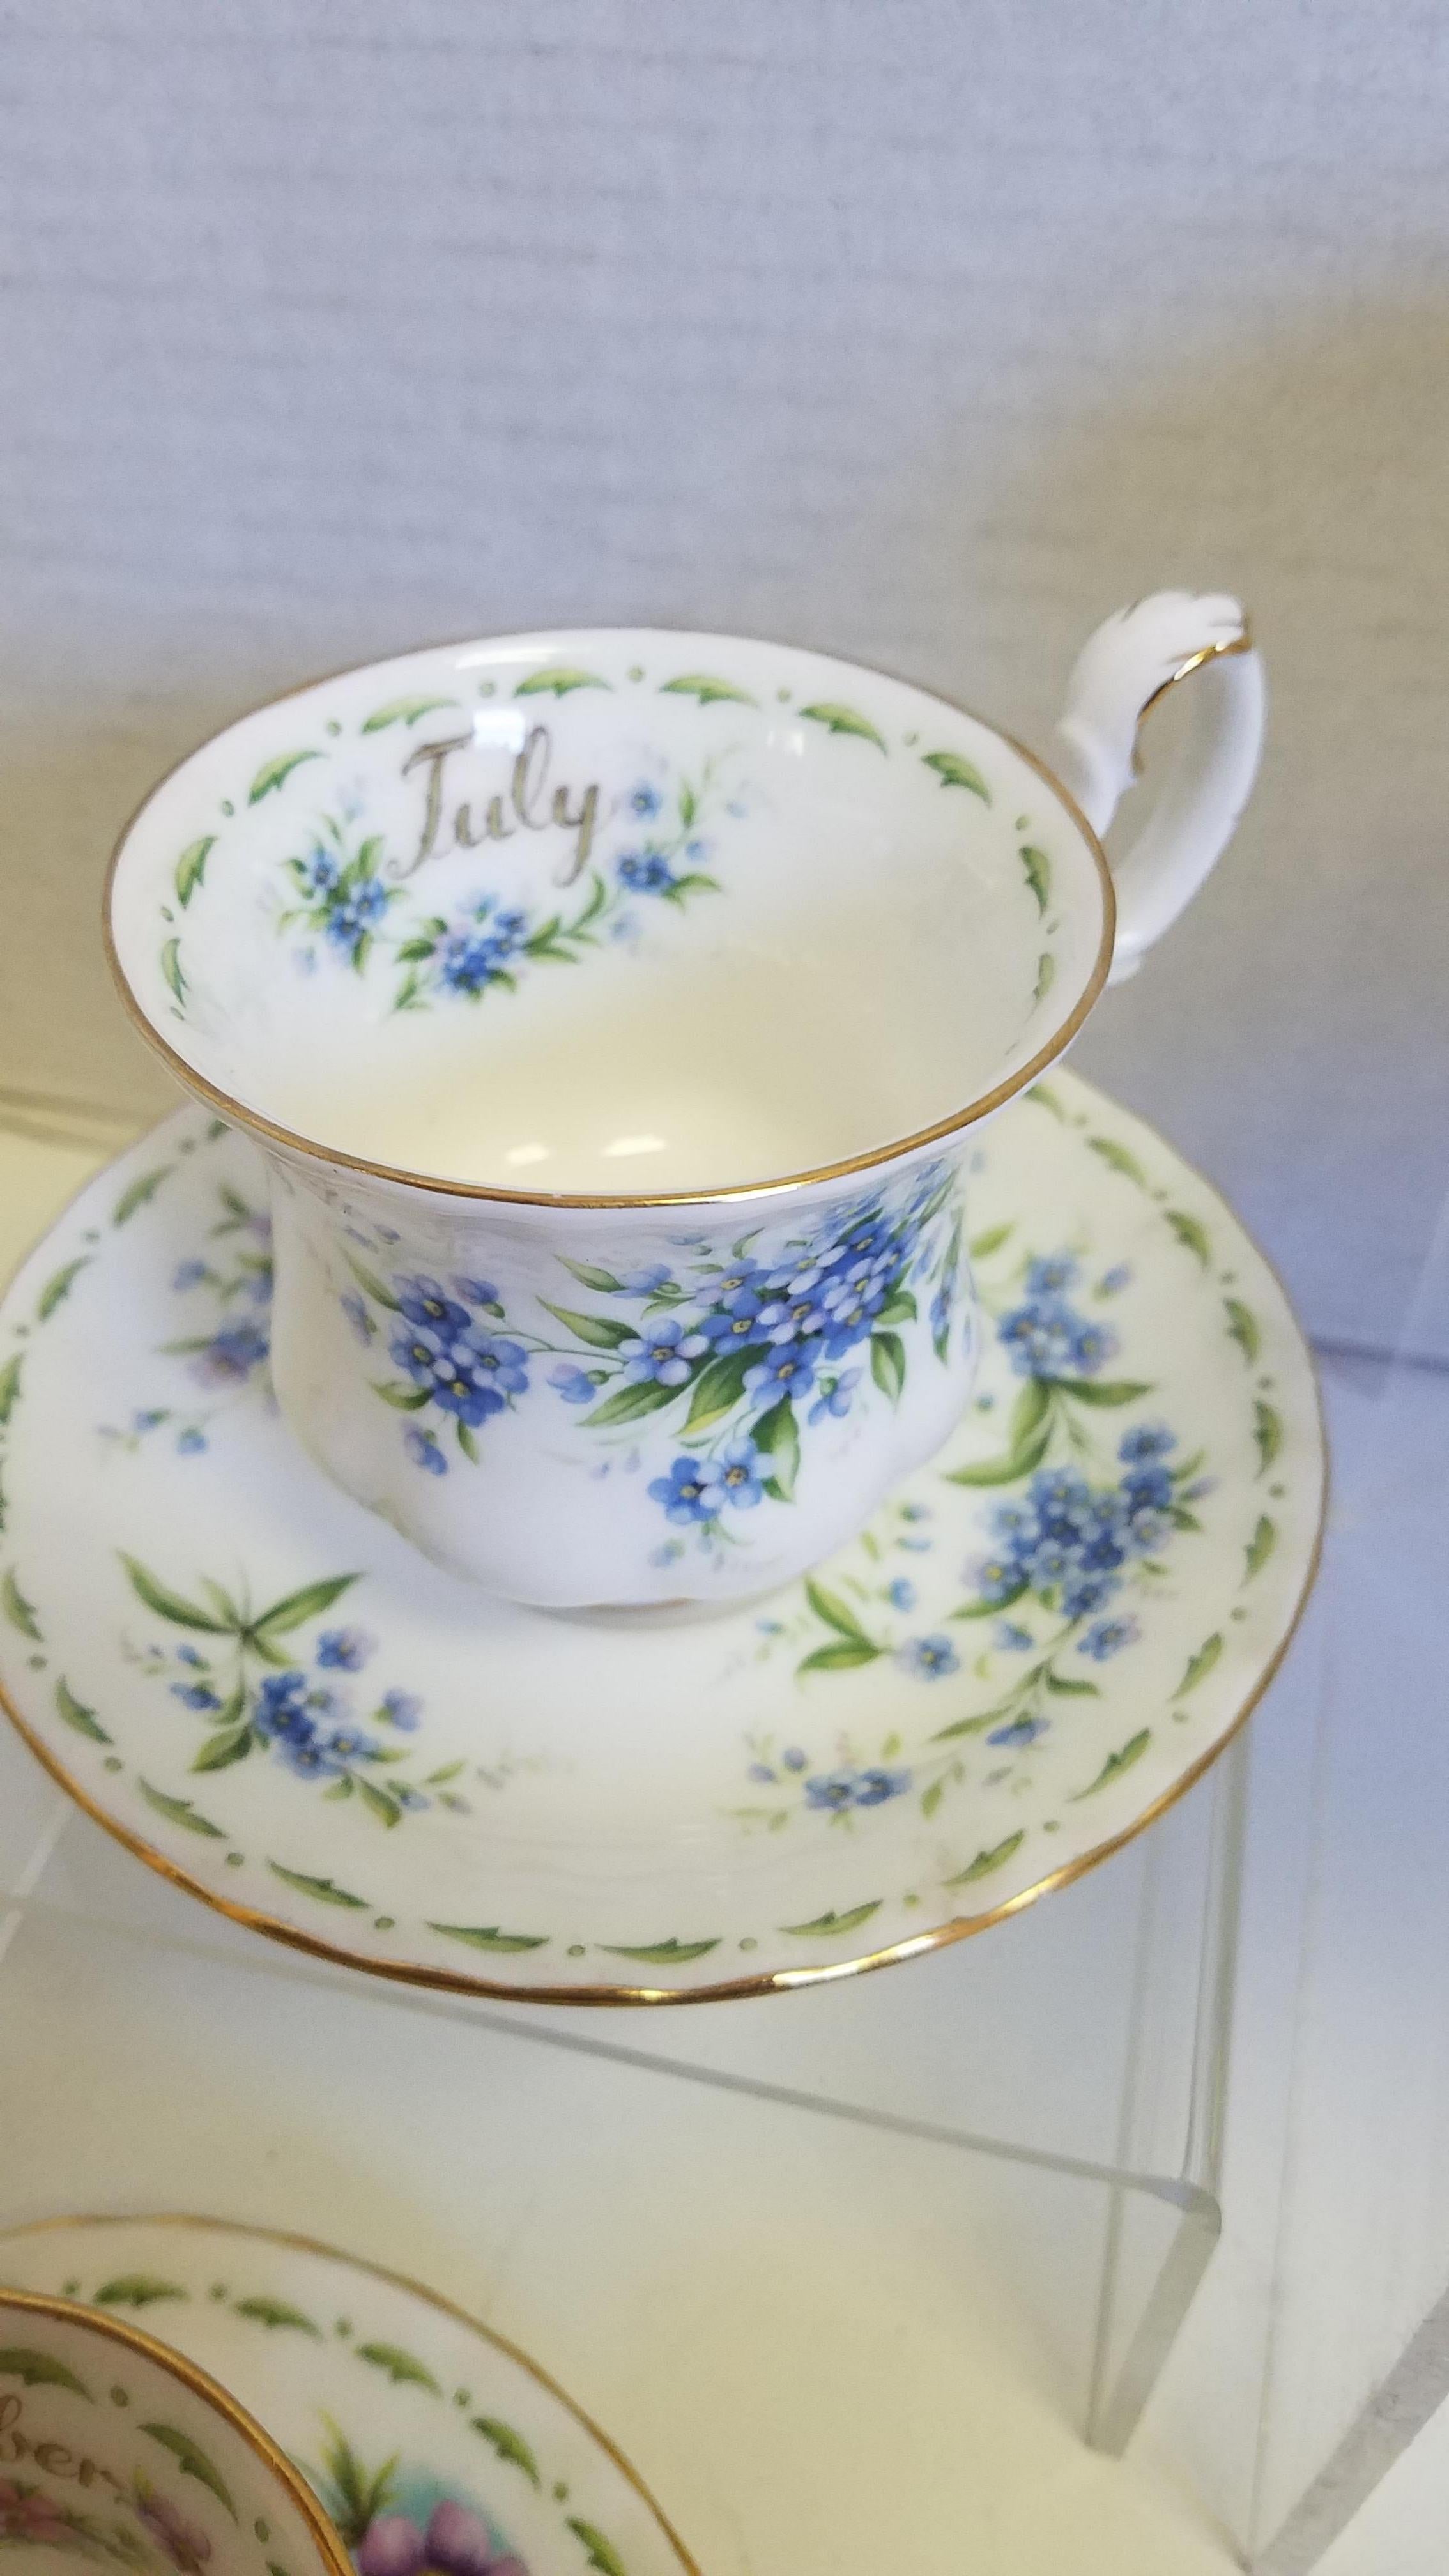 Set of 6 Vintage Royal Albert Flowers of the Month Teacup or Saucer In Good Condition For Sale In Livingston, NJ